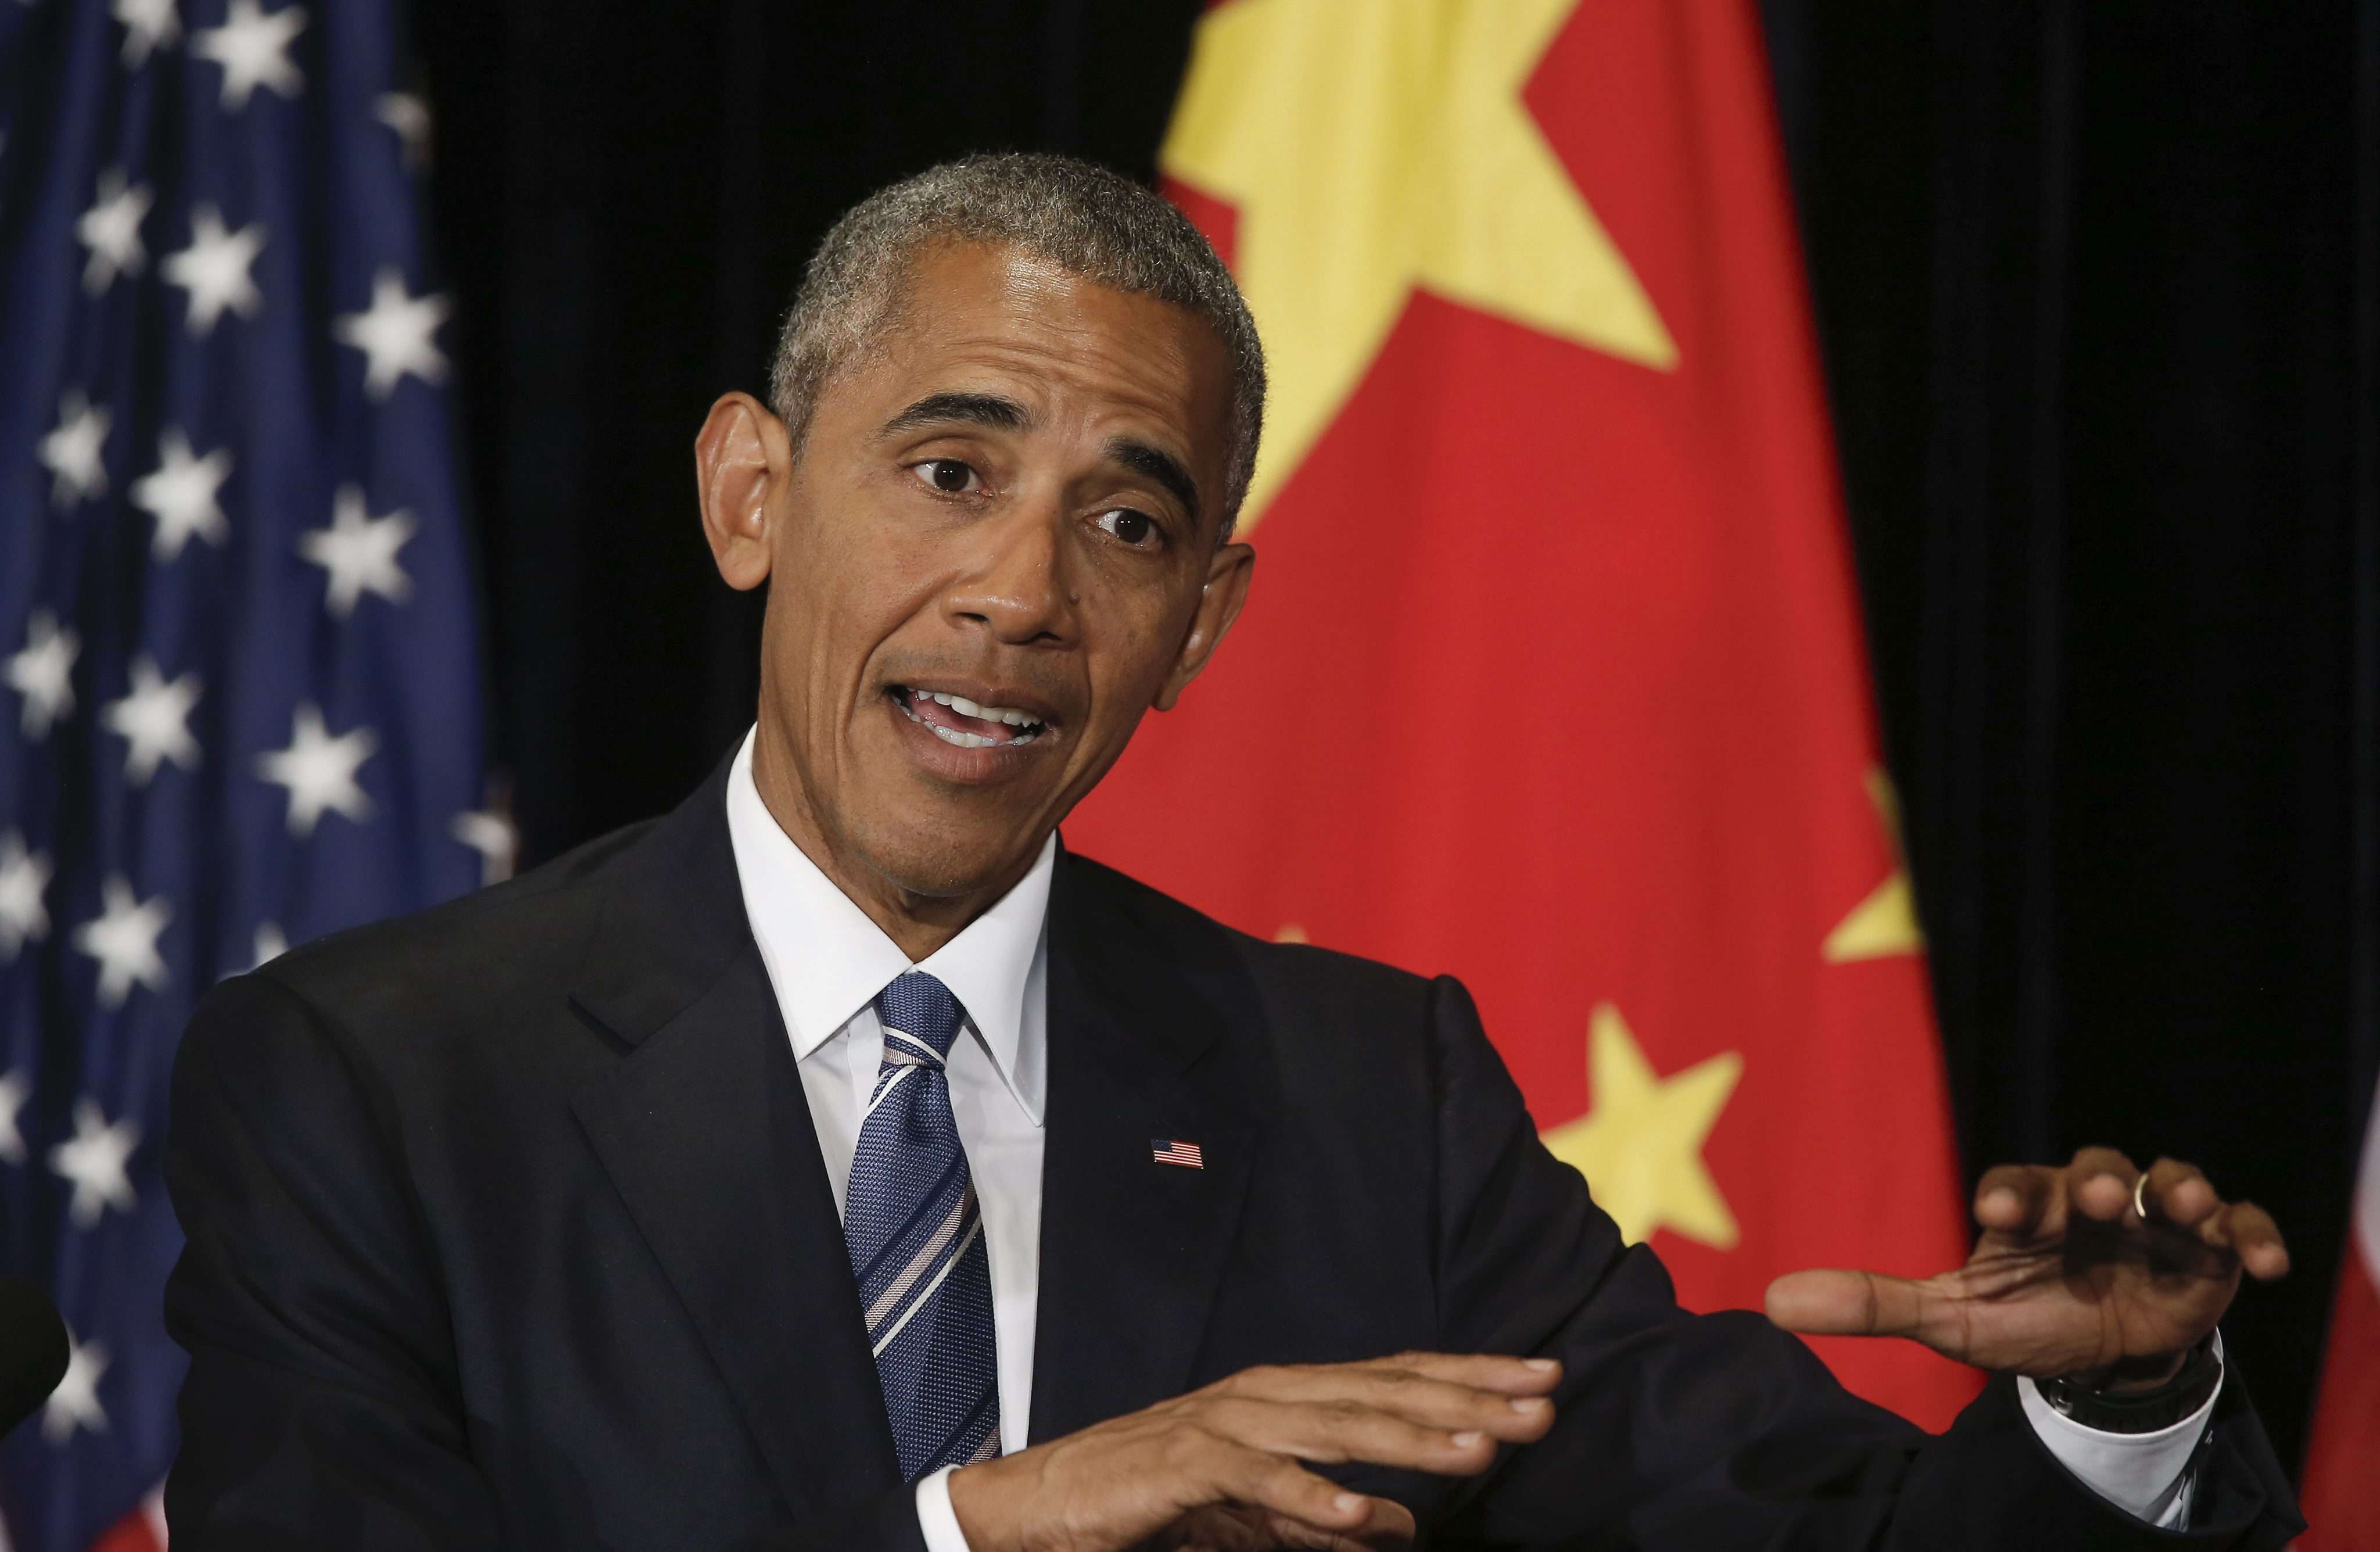 US President Barack Obama spoke for about 40 minutes at a packed press conference in Hangzhou. Photo: EPA